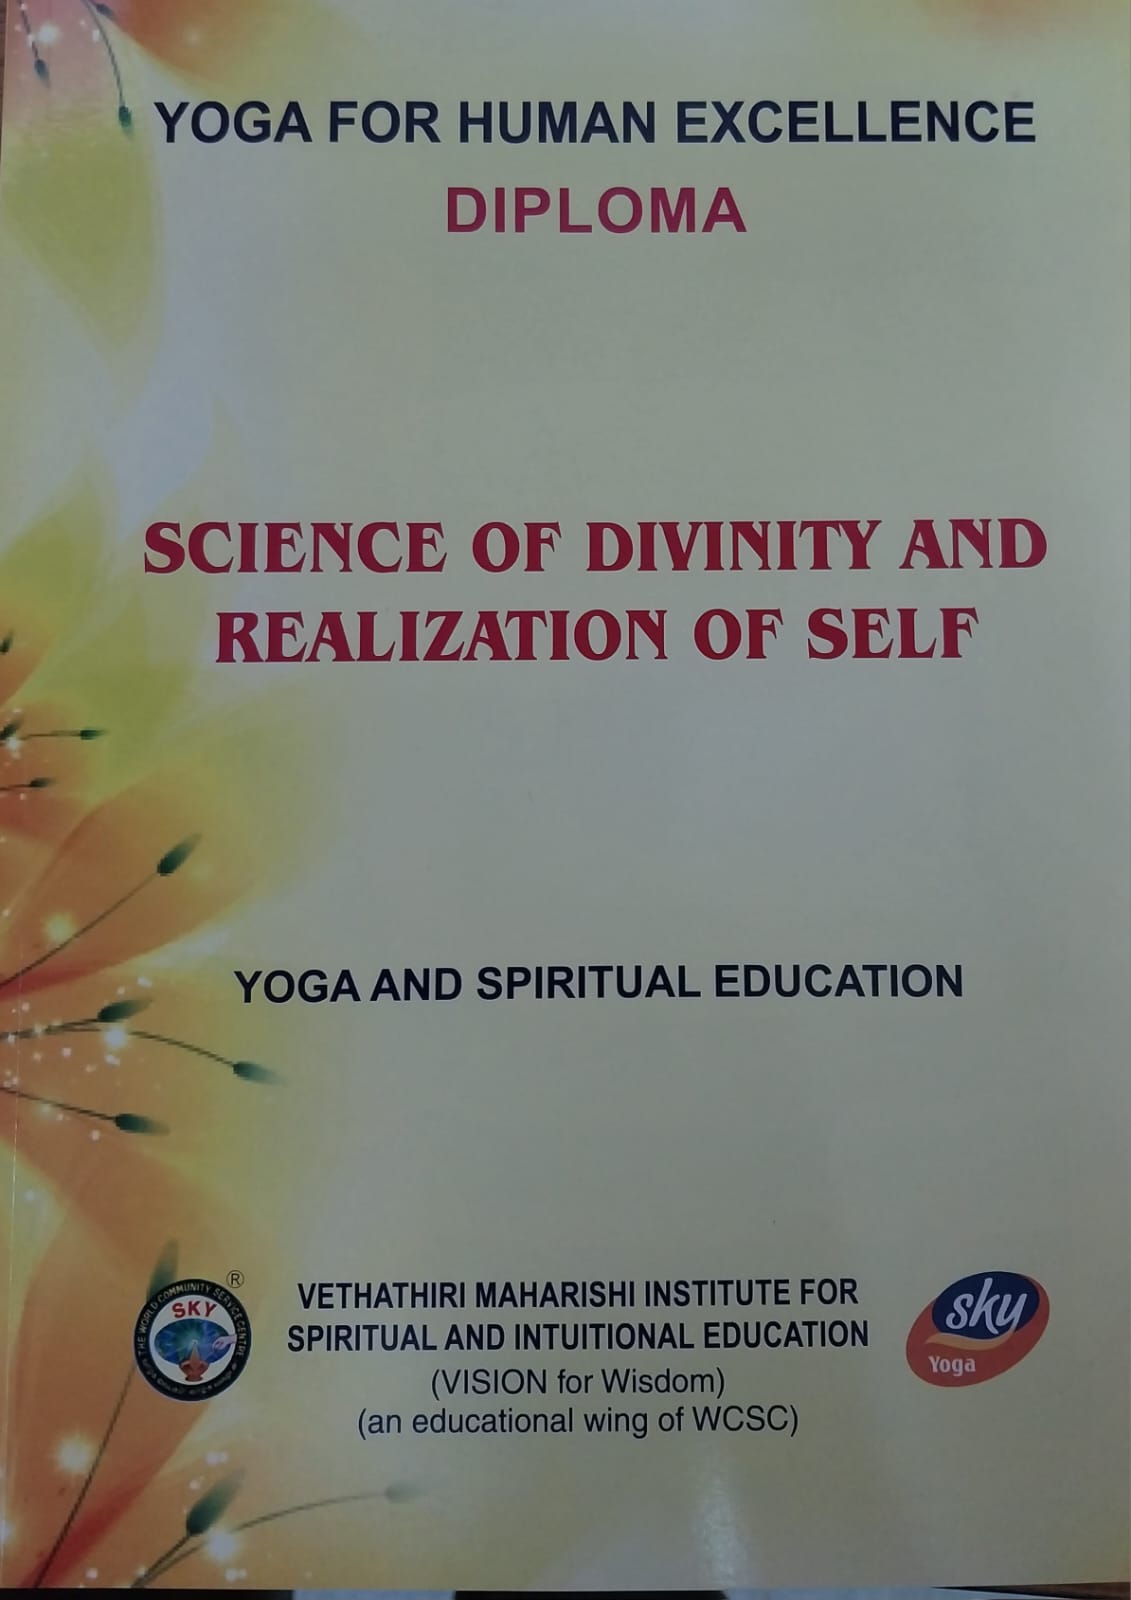 Science of Divinity and Realization of Self - English Diploma Book